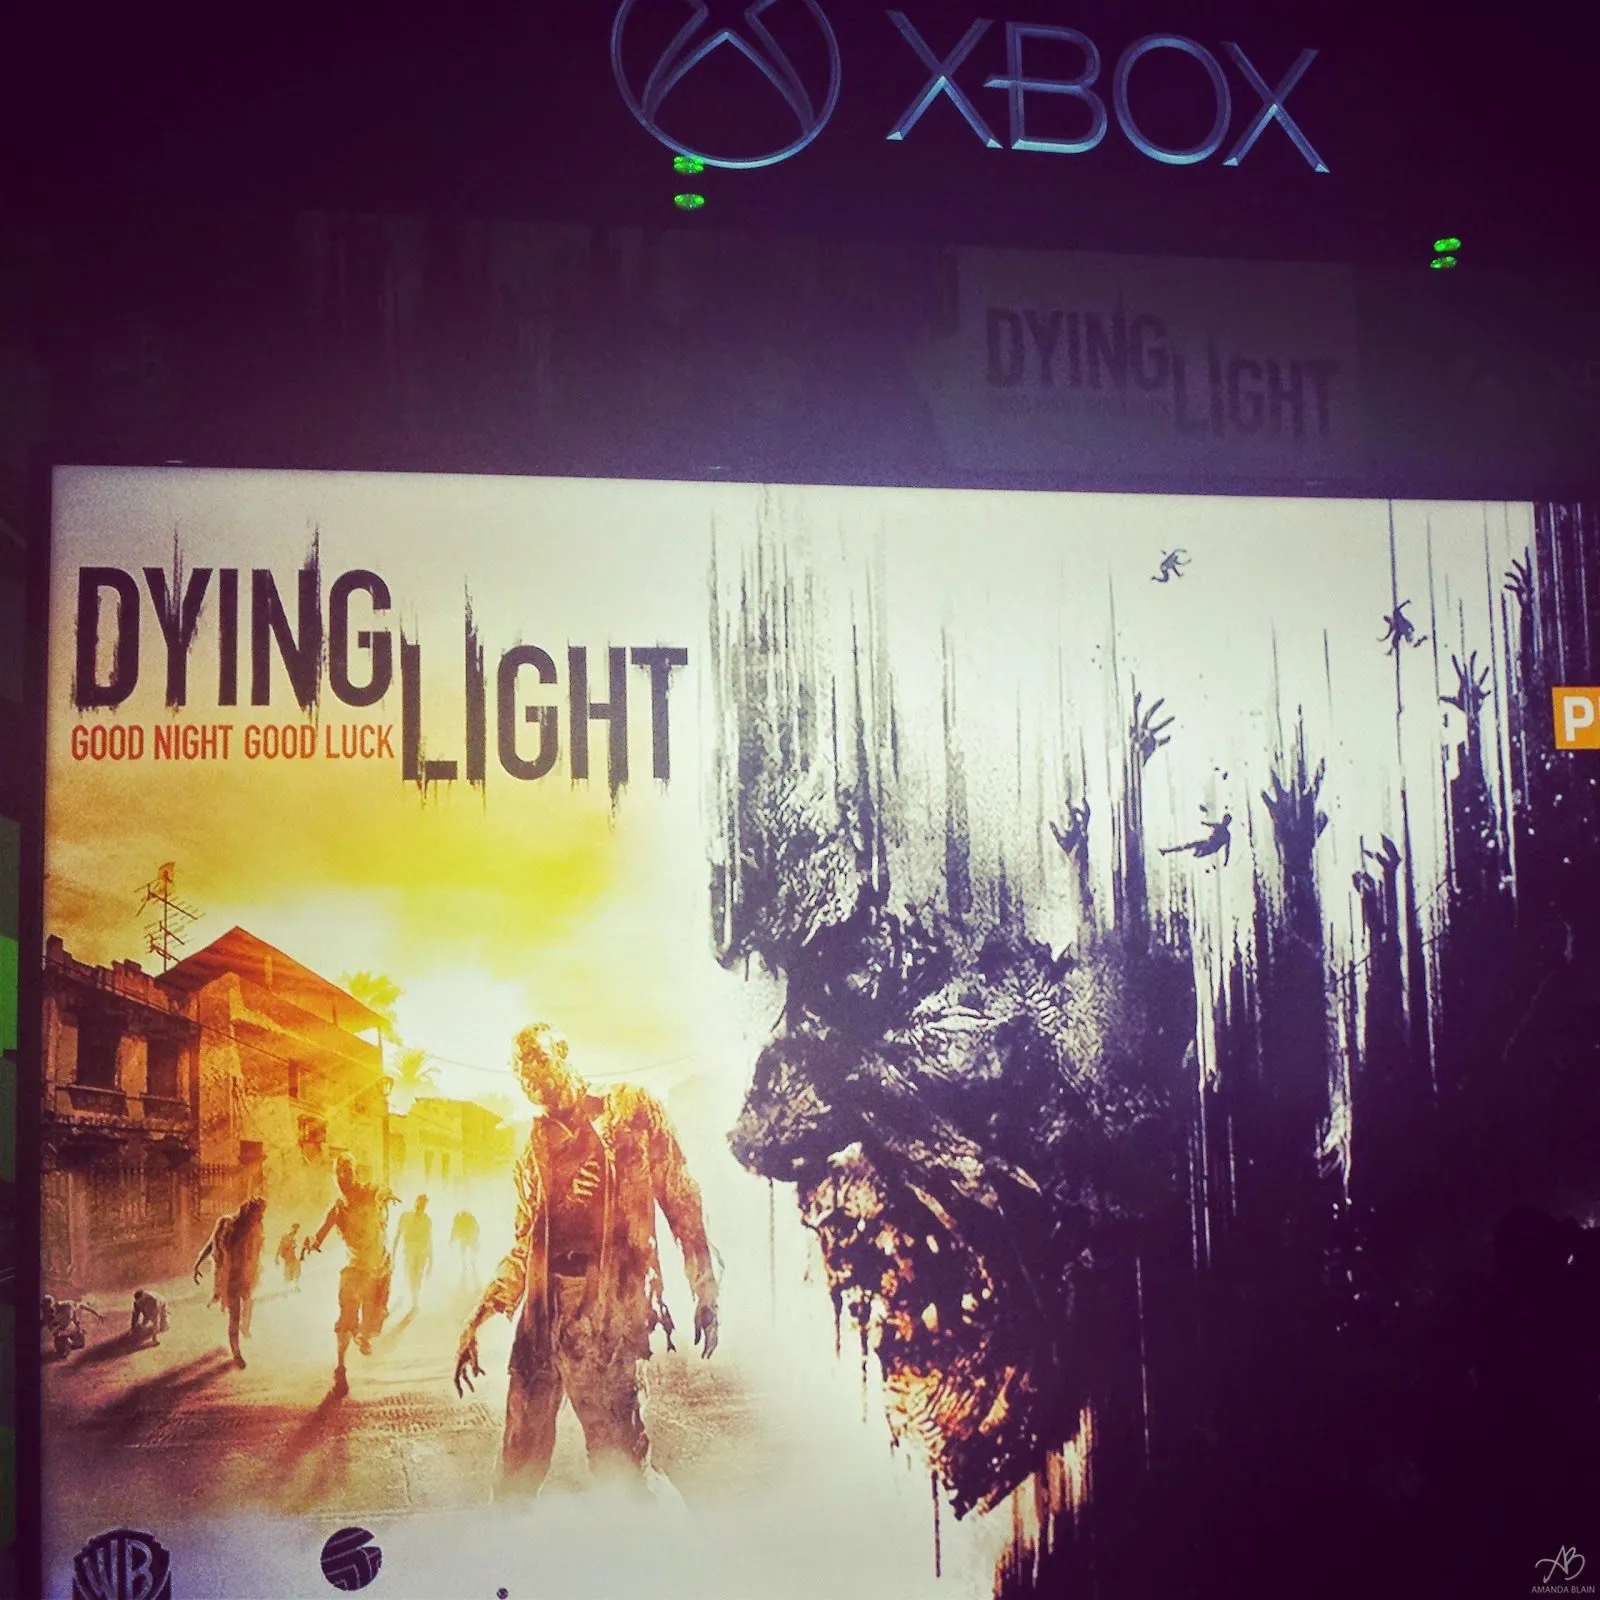 Really Excited for Dying Light